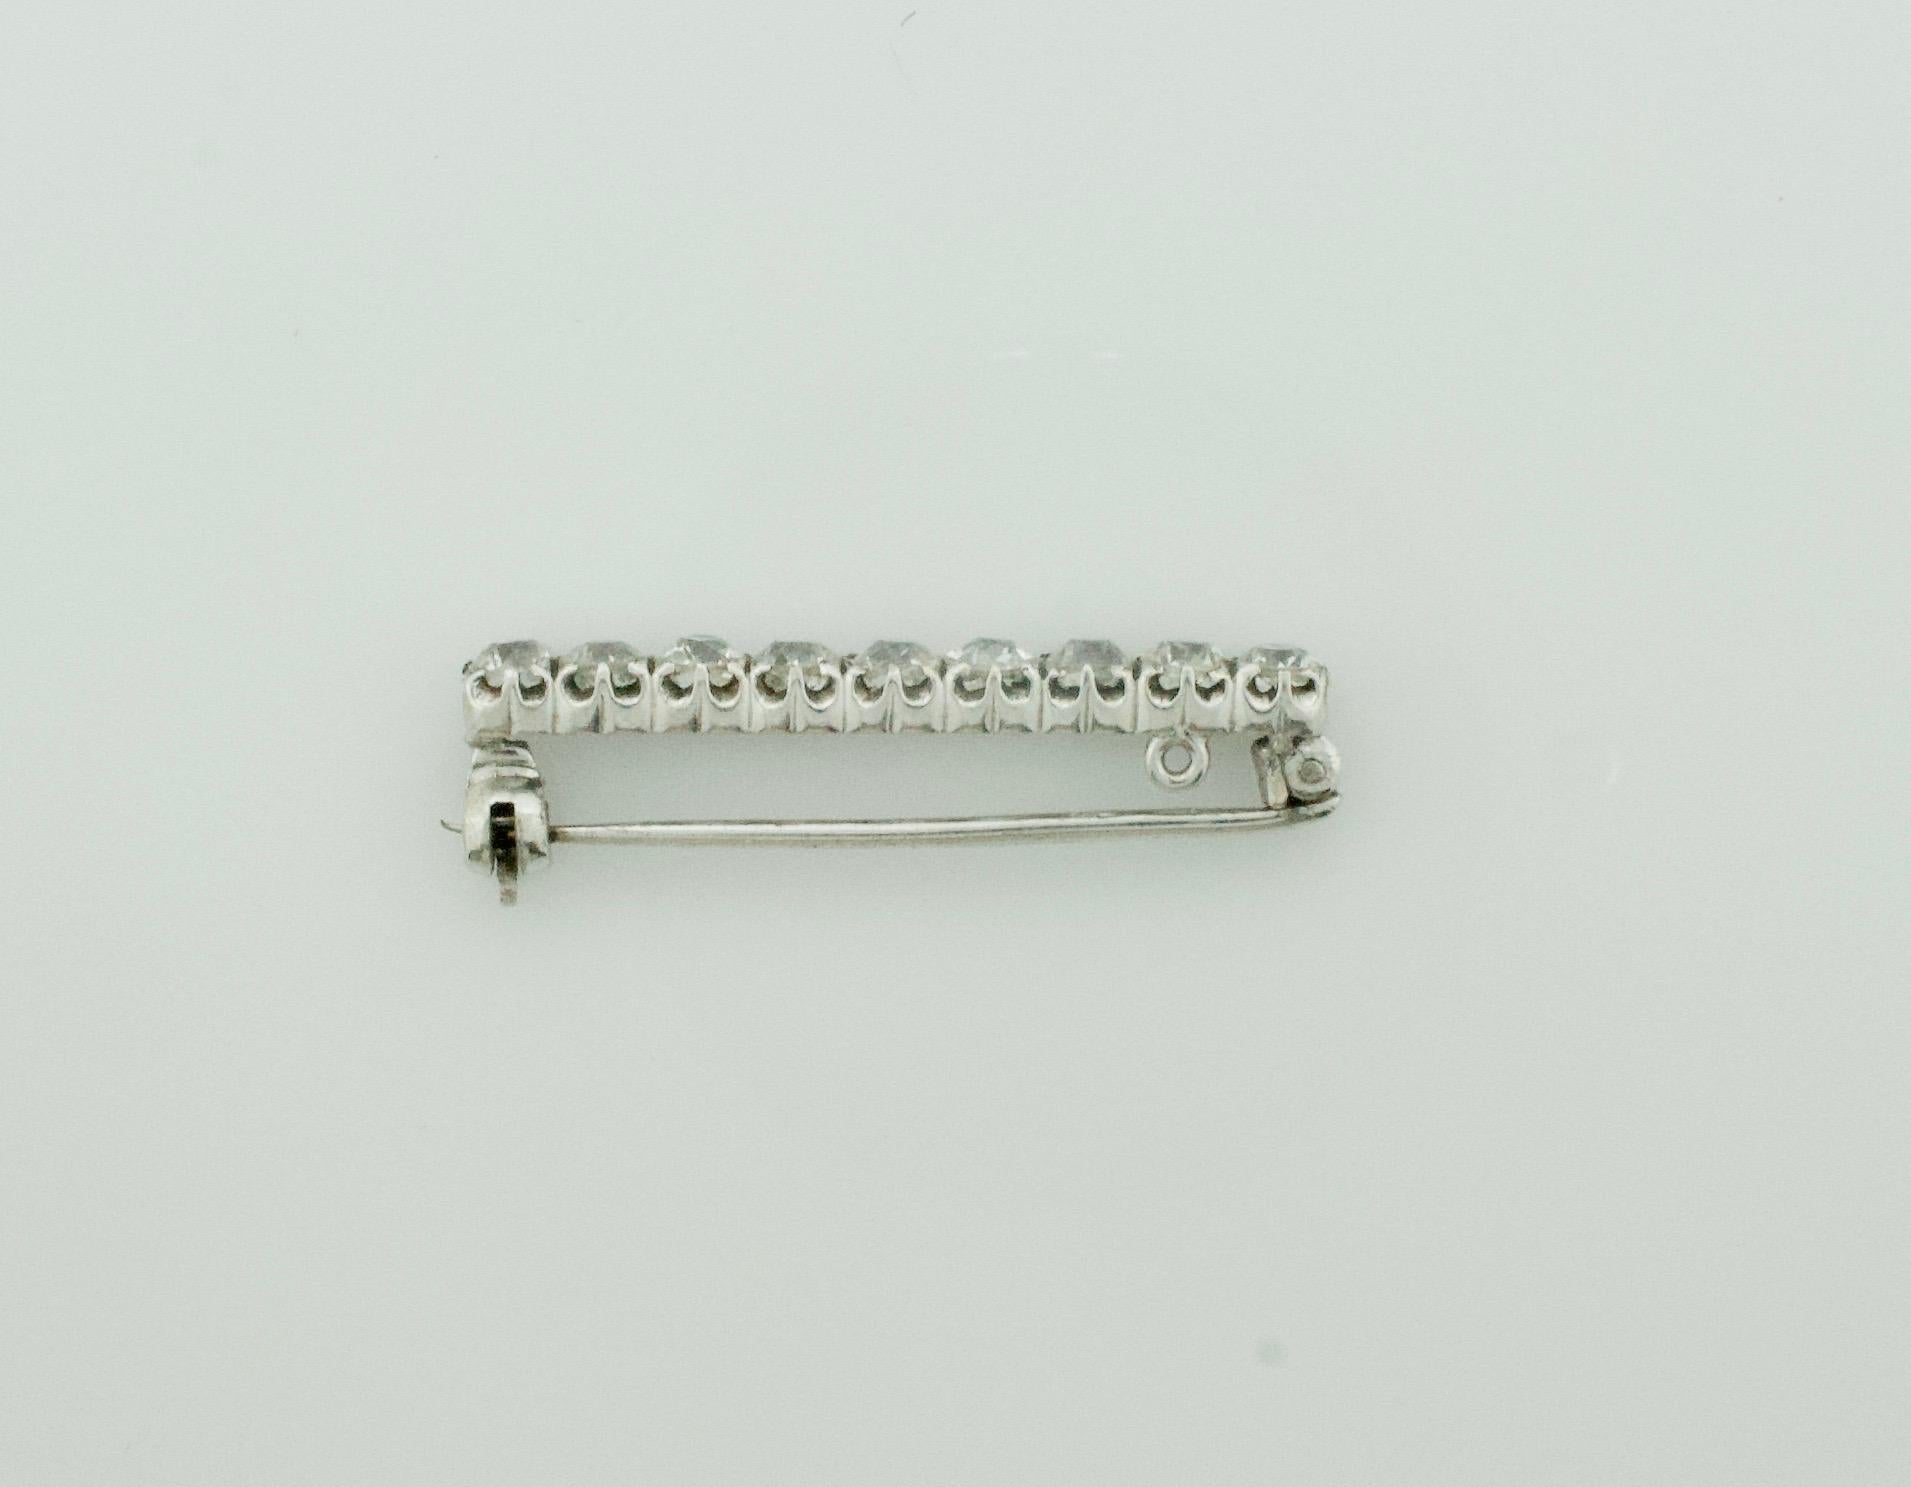 Simply Sweet Diamond Bar Brooch in Platinum and White Gold Circa 1920's
Nine Old European Diamonds Weighing 2.25 approximately   [GH VS2-SI1]
One Quarter Carat Each  